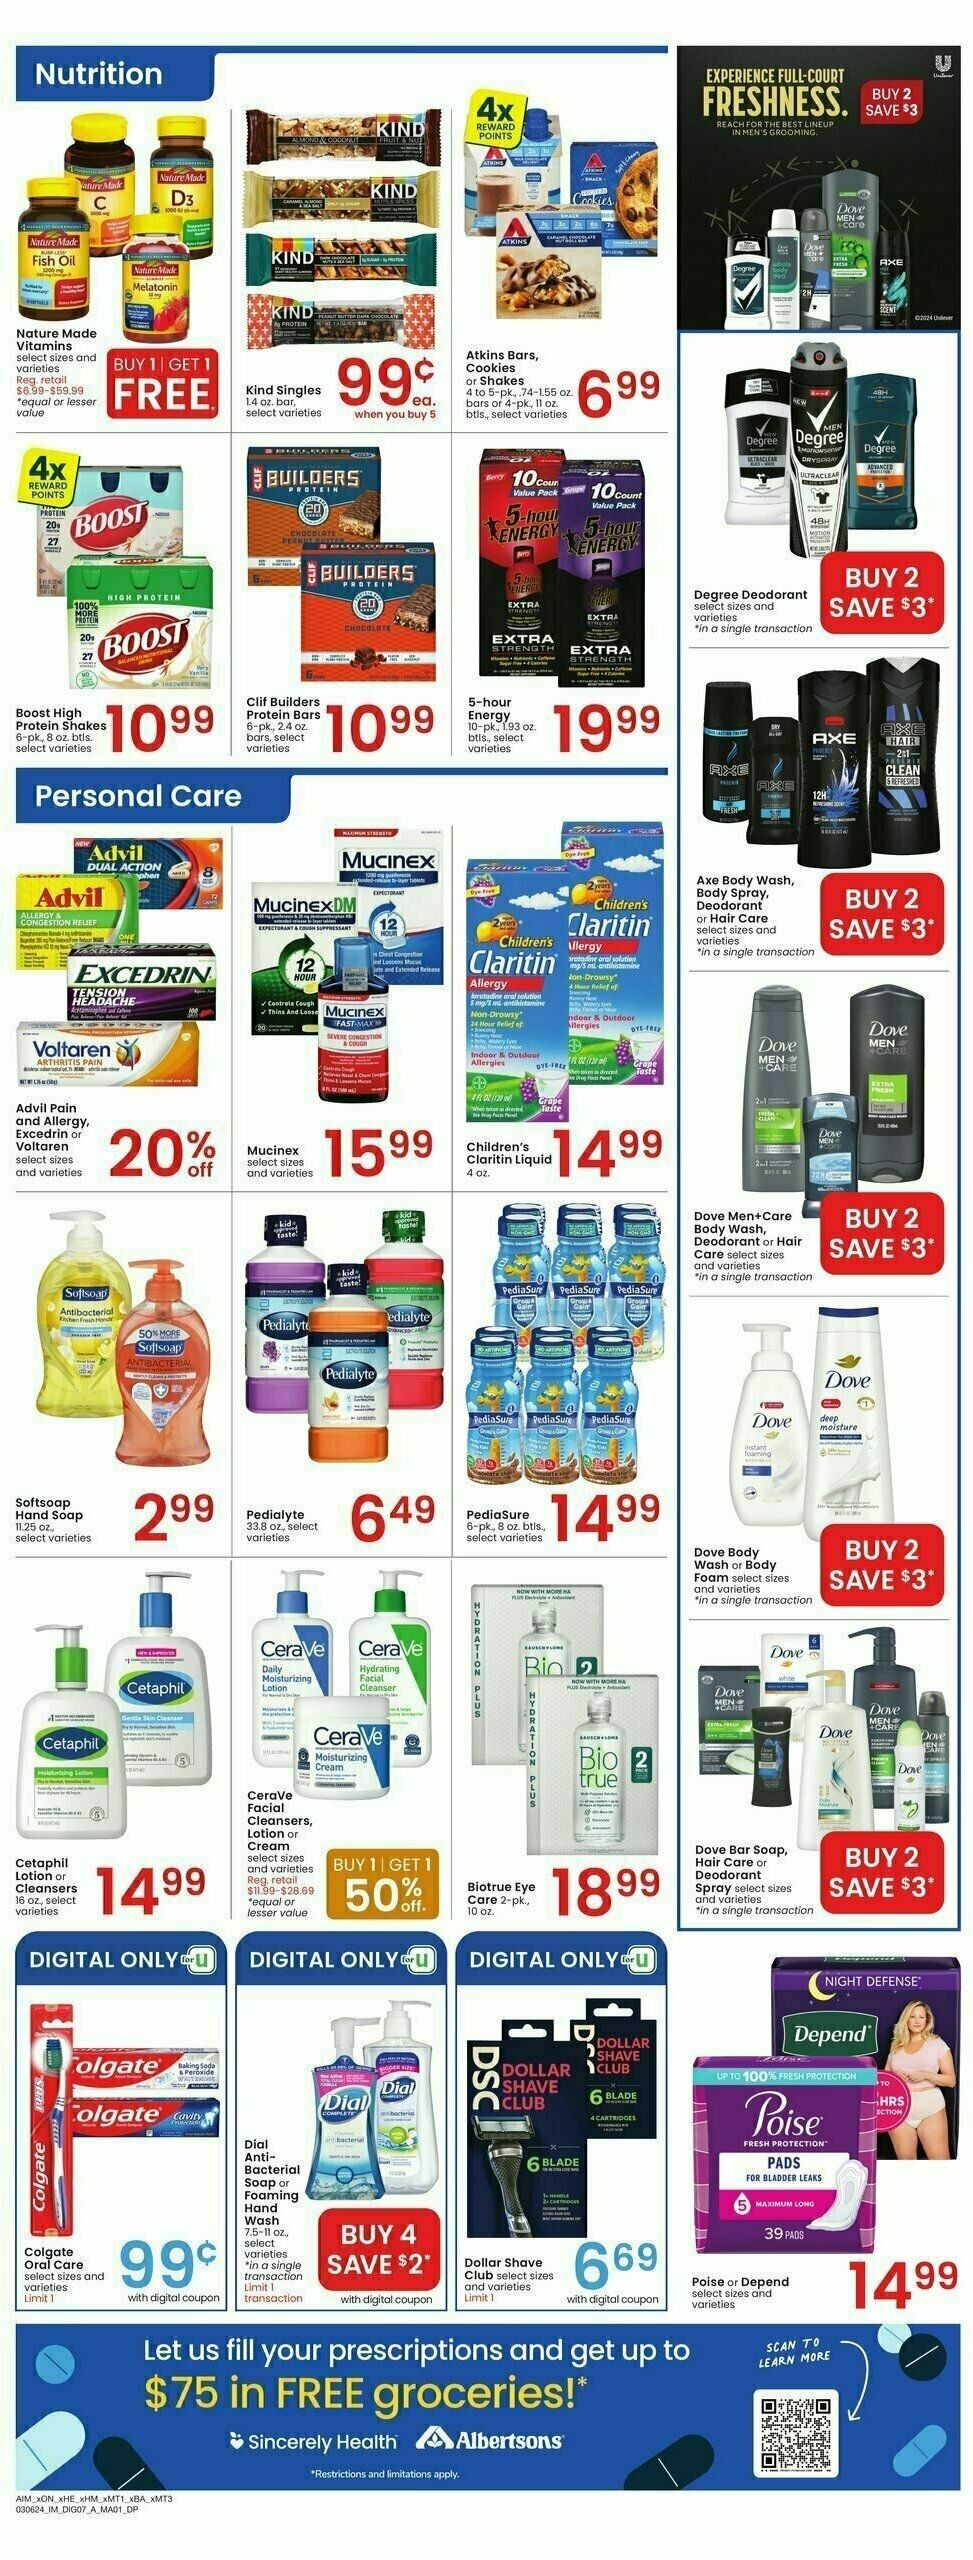 Albertsons Weekly Ad from March 6